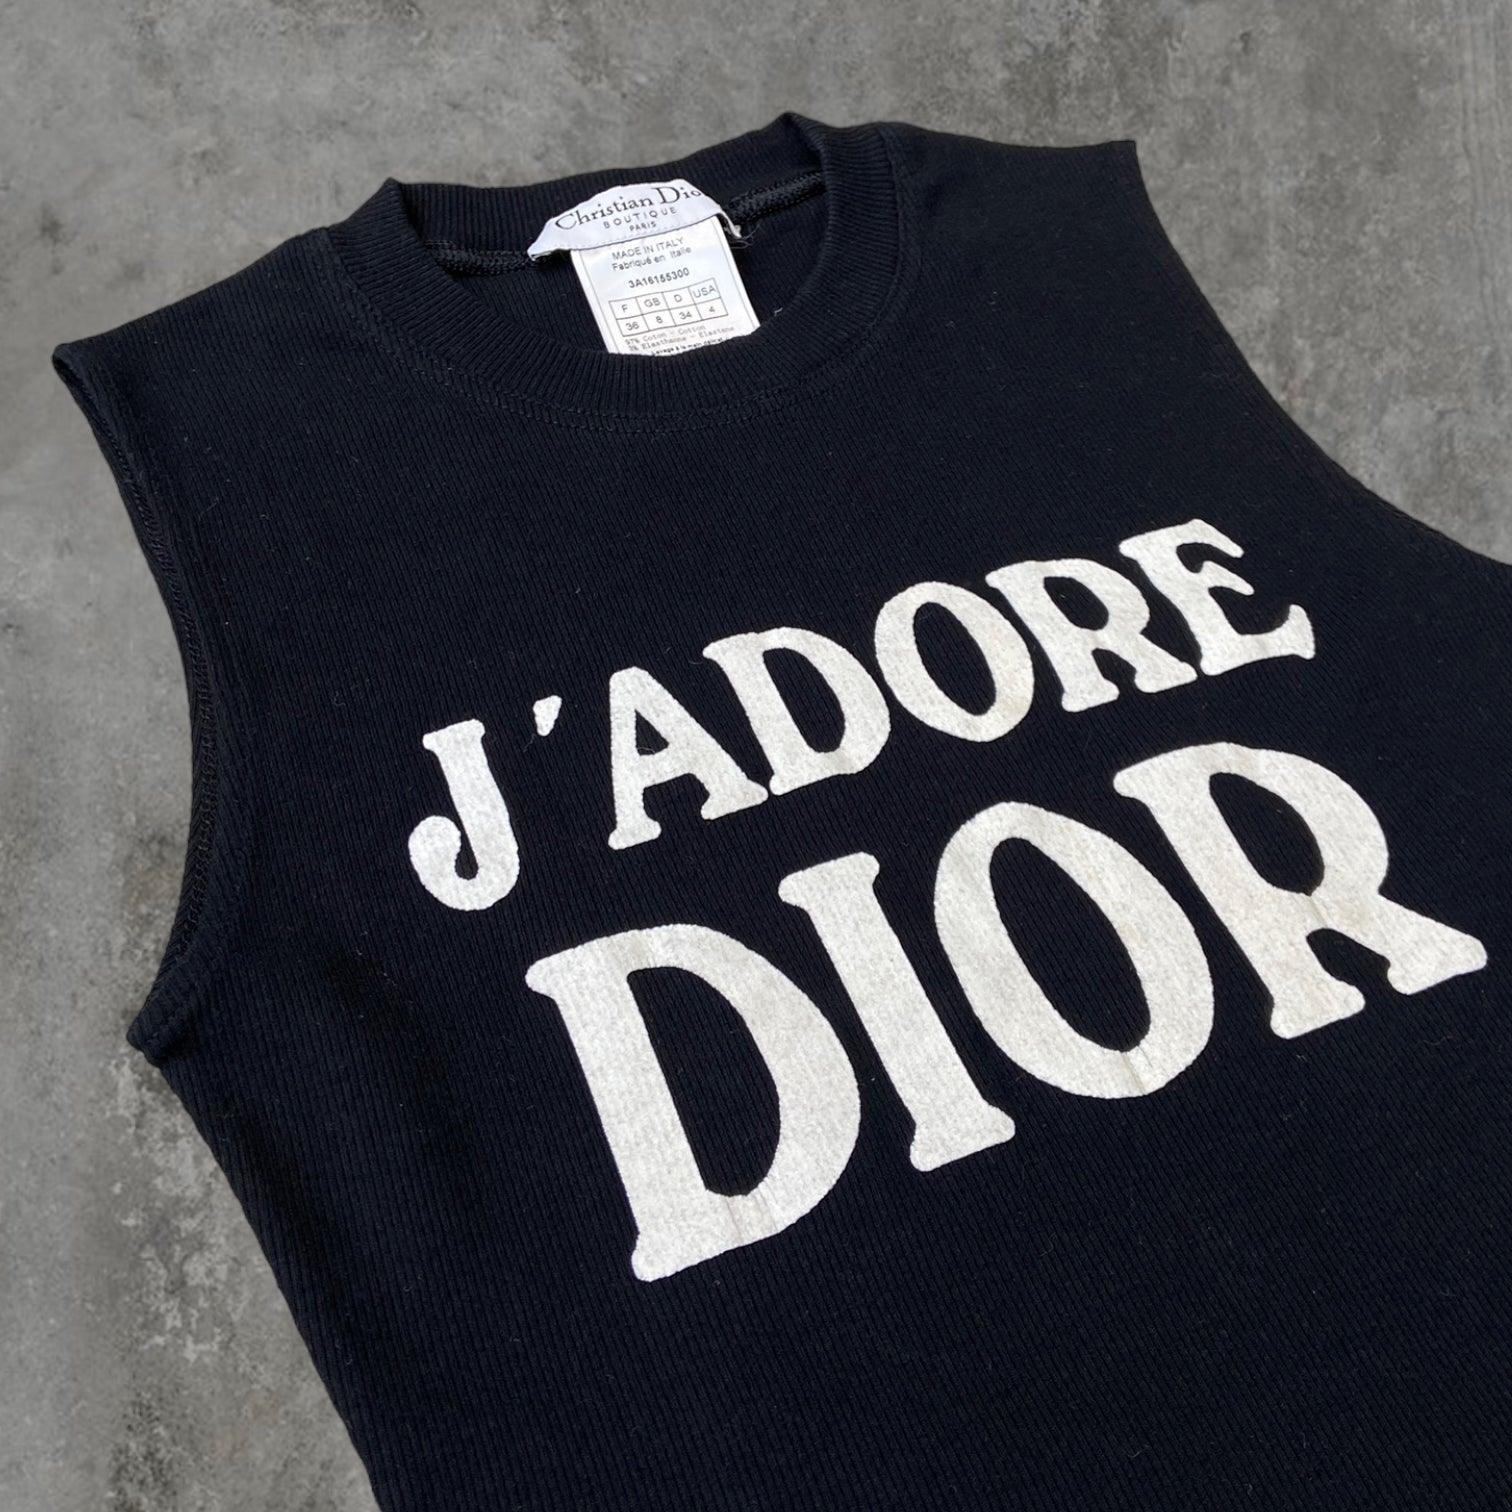 DIOR 'J'ADORE DIOR' RIBBED TANK TOP - M - Known Source